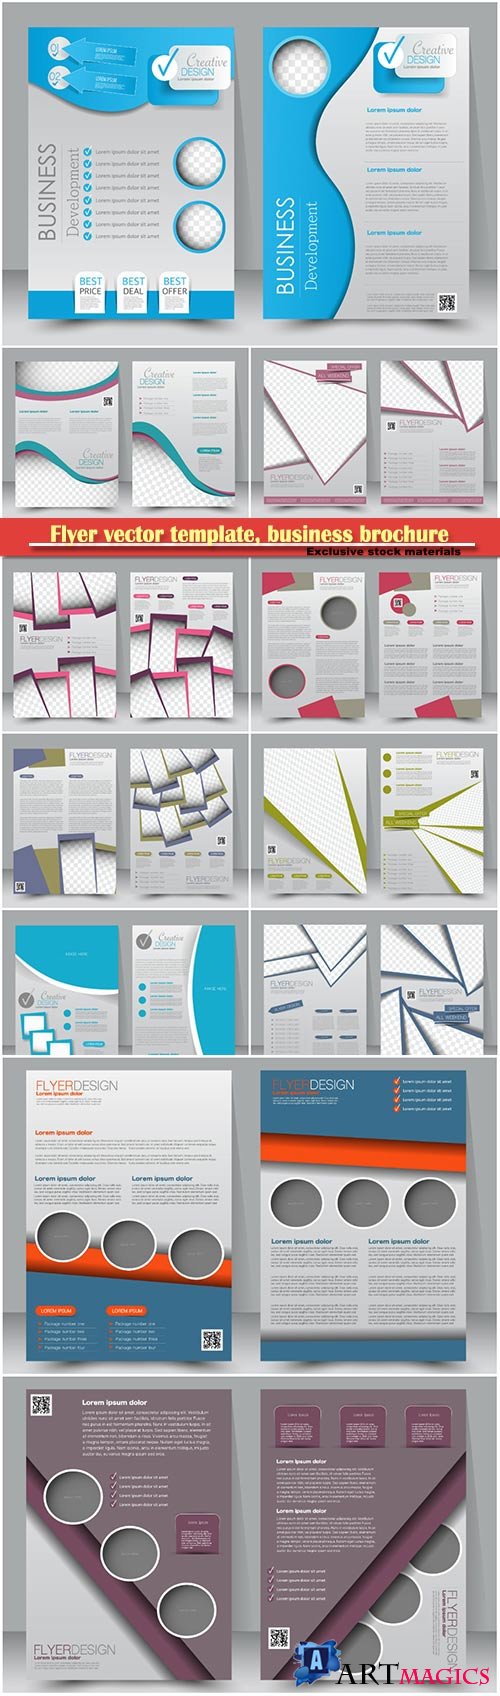 Flyer vector template, business brochure, magazine cover # 12